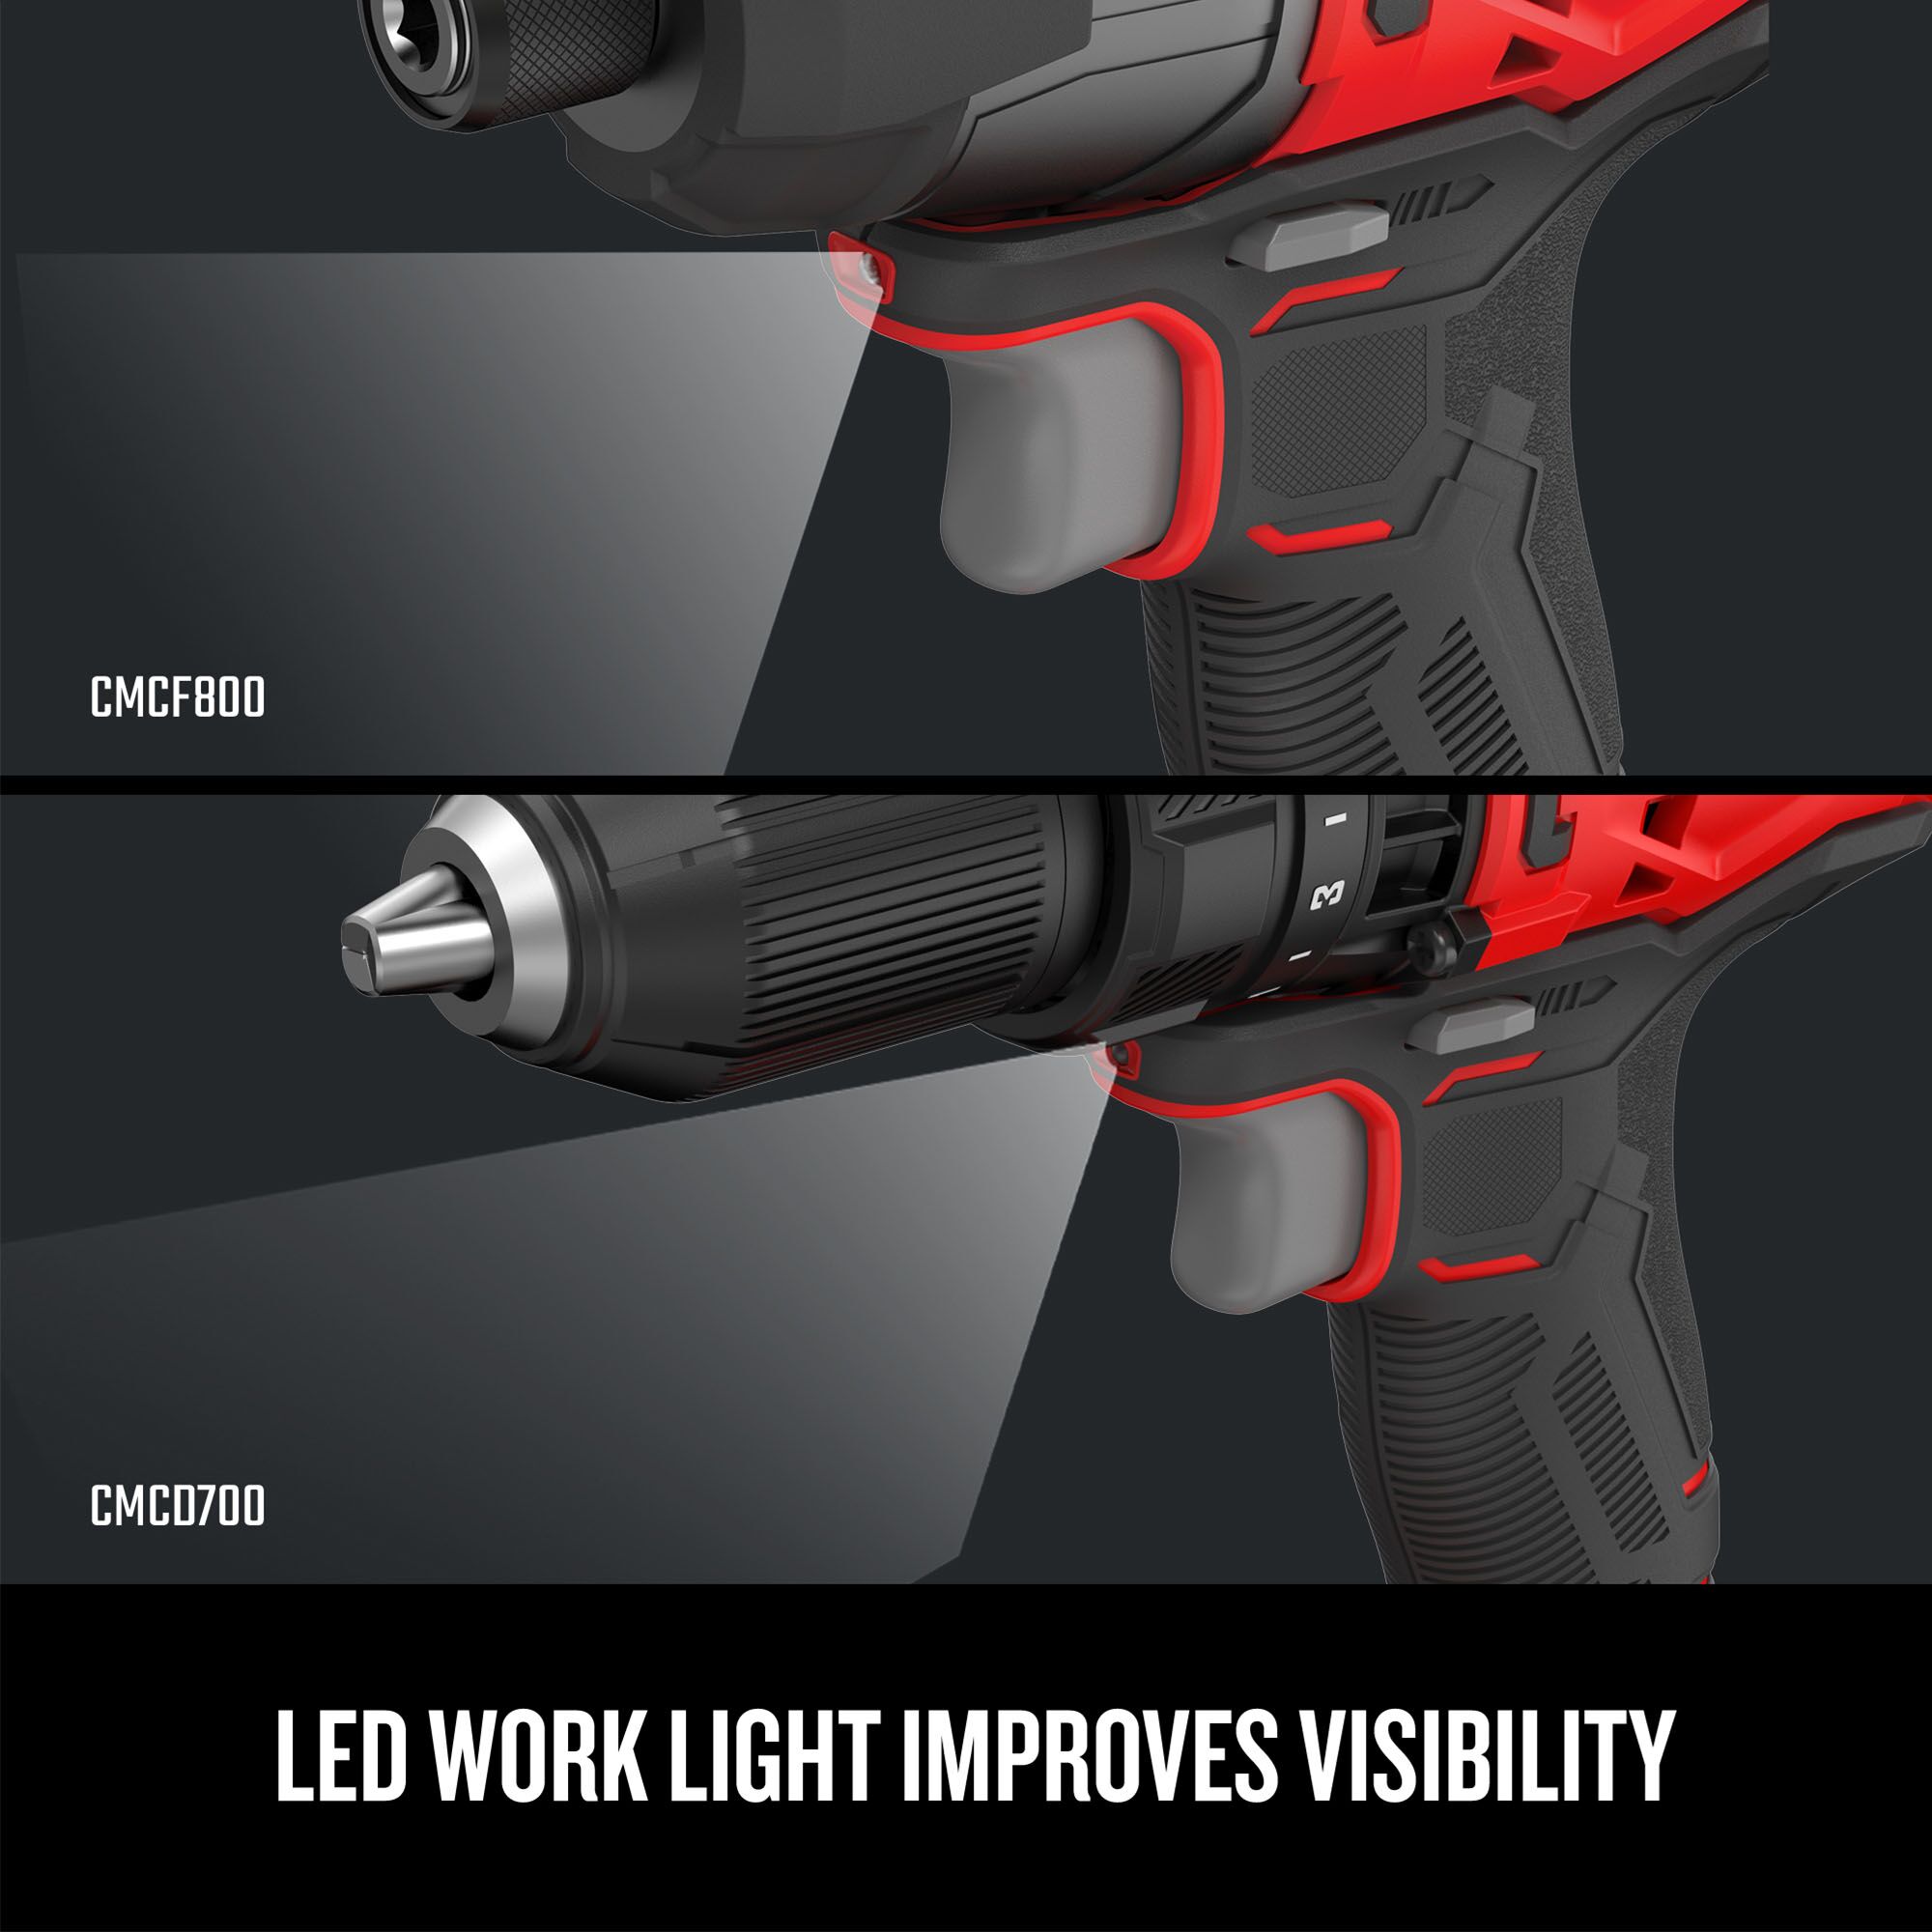 Graphic of CRAFTSMAN Combo Kits: Power Tools highlighting product features